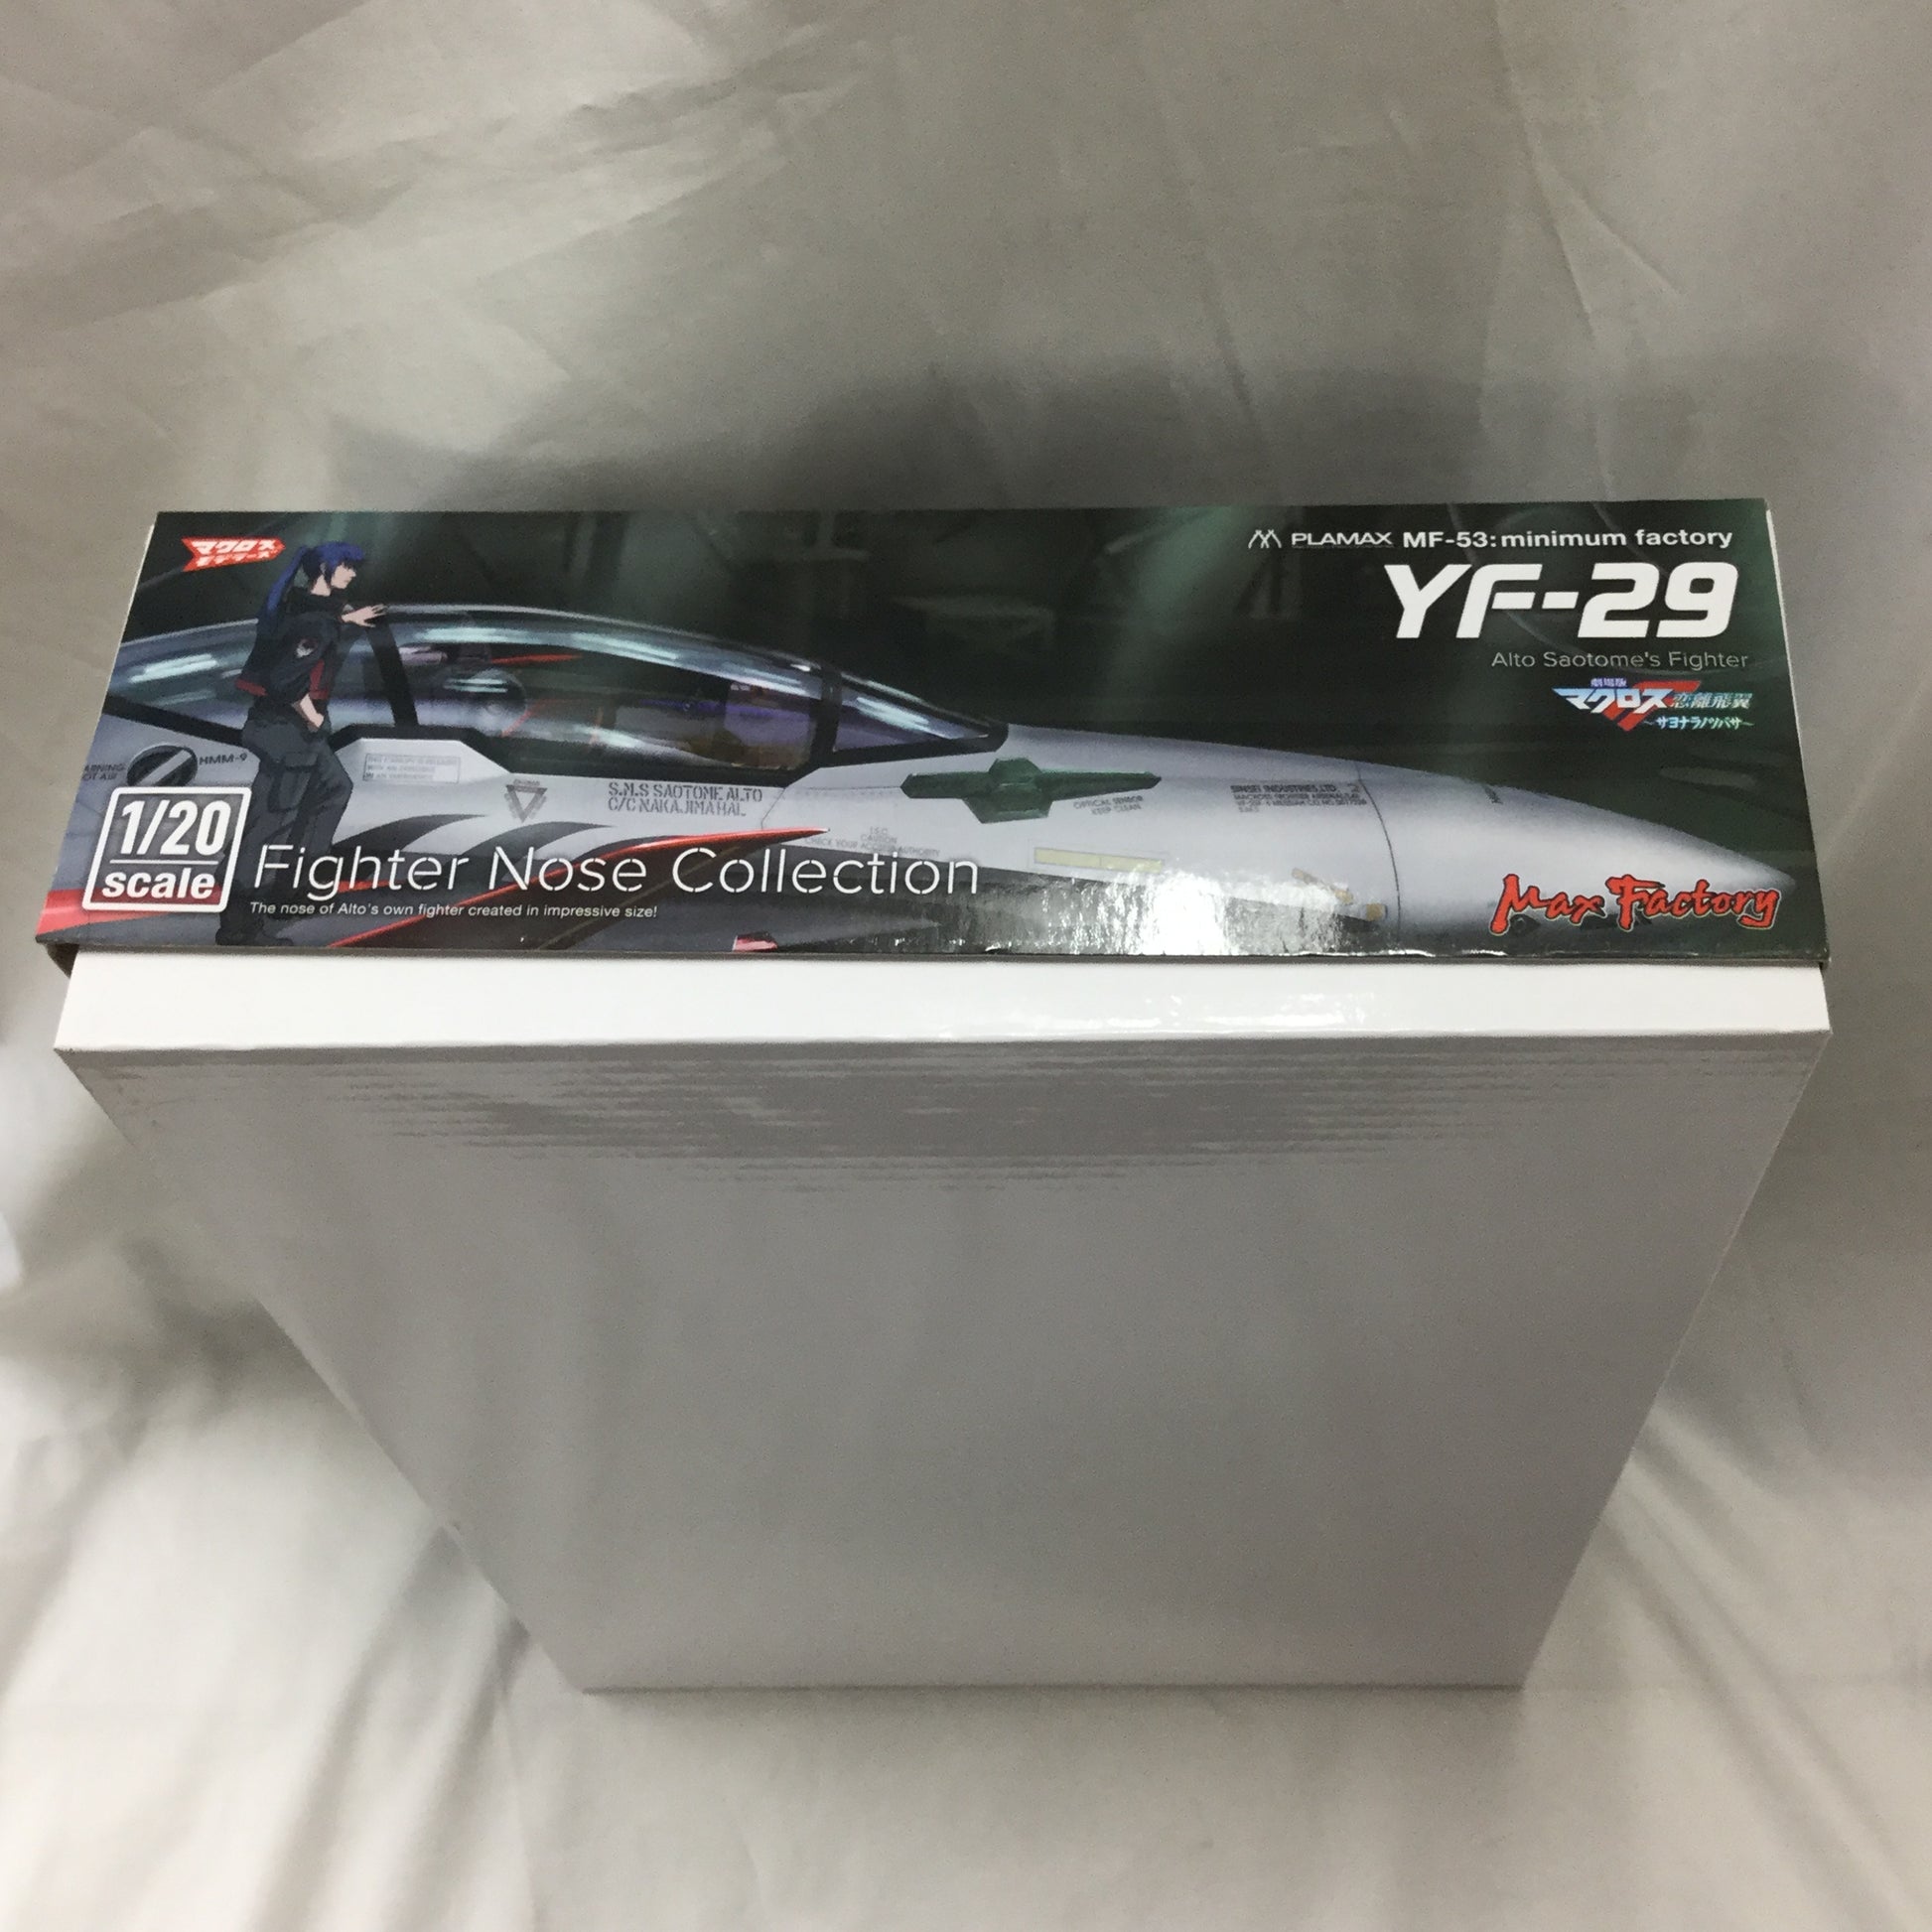 PLAMAX MF-53 minimum factory Movie Macross Frontier Fighter Nose Collection YF-29 Durandal Valkyrie (Alto Saotome Fighter), animota